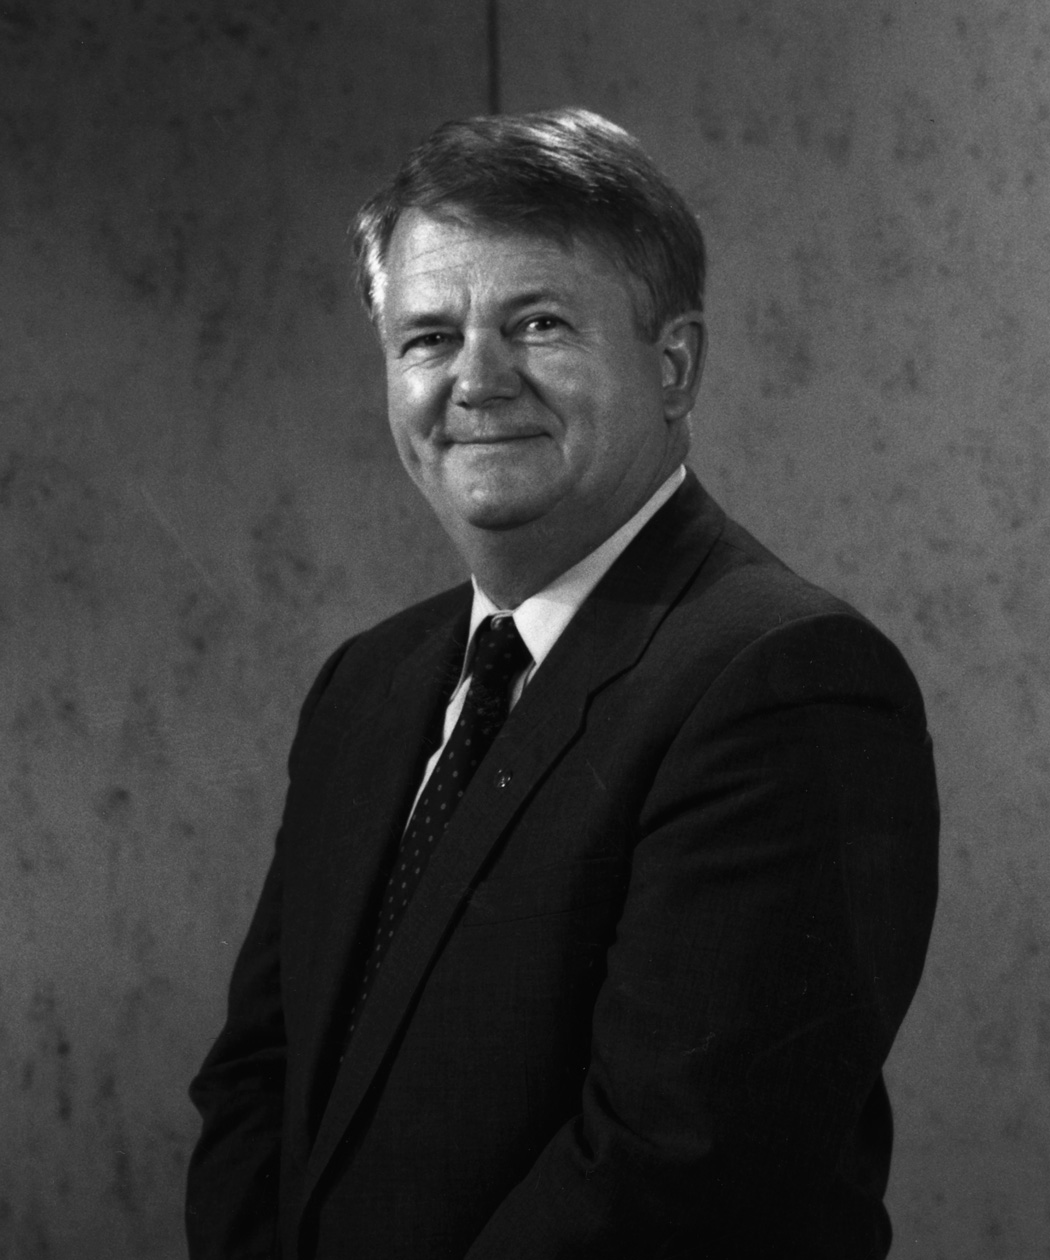 In 1989, Robert C. Detweiler was named university president. Formerly vice president of academic affairs at CSU San Bernardino and a dean at San Diego State University, Detweiler said at the time of his hiring that "We must make special efforts to ensure that our student body reflects the community ... We must find ways to relate our teaching and research to the needs of a dynamic, new society in California."